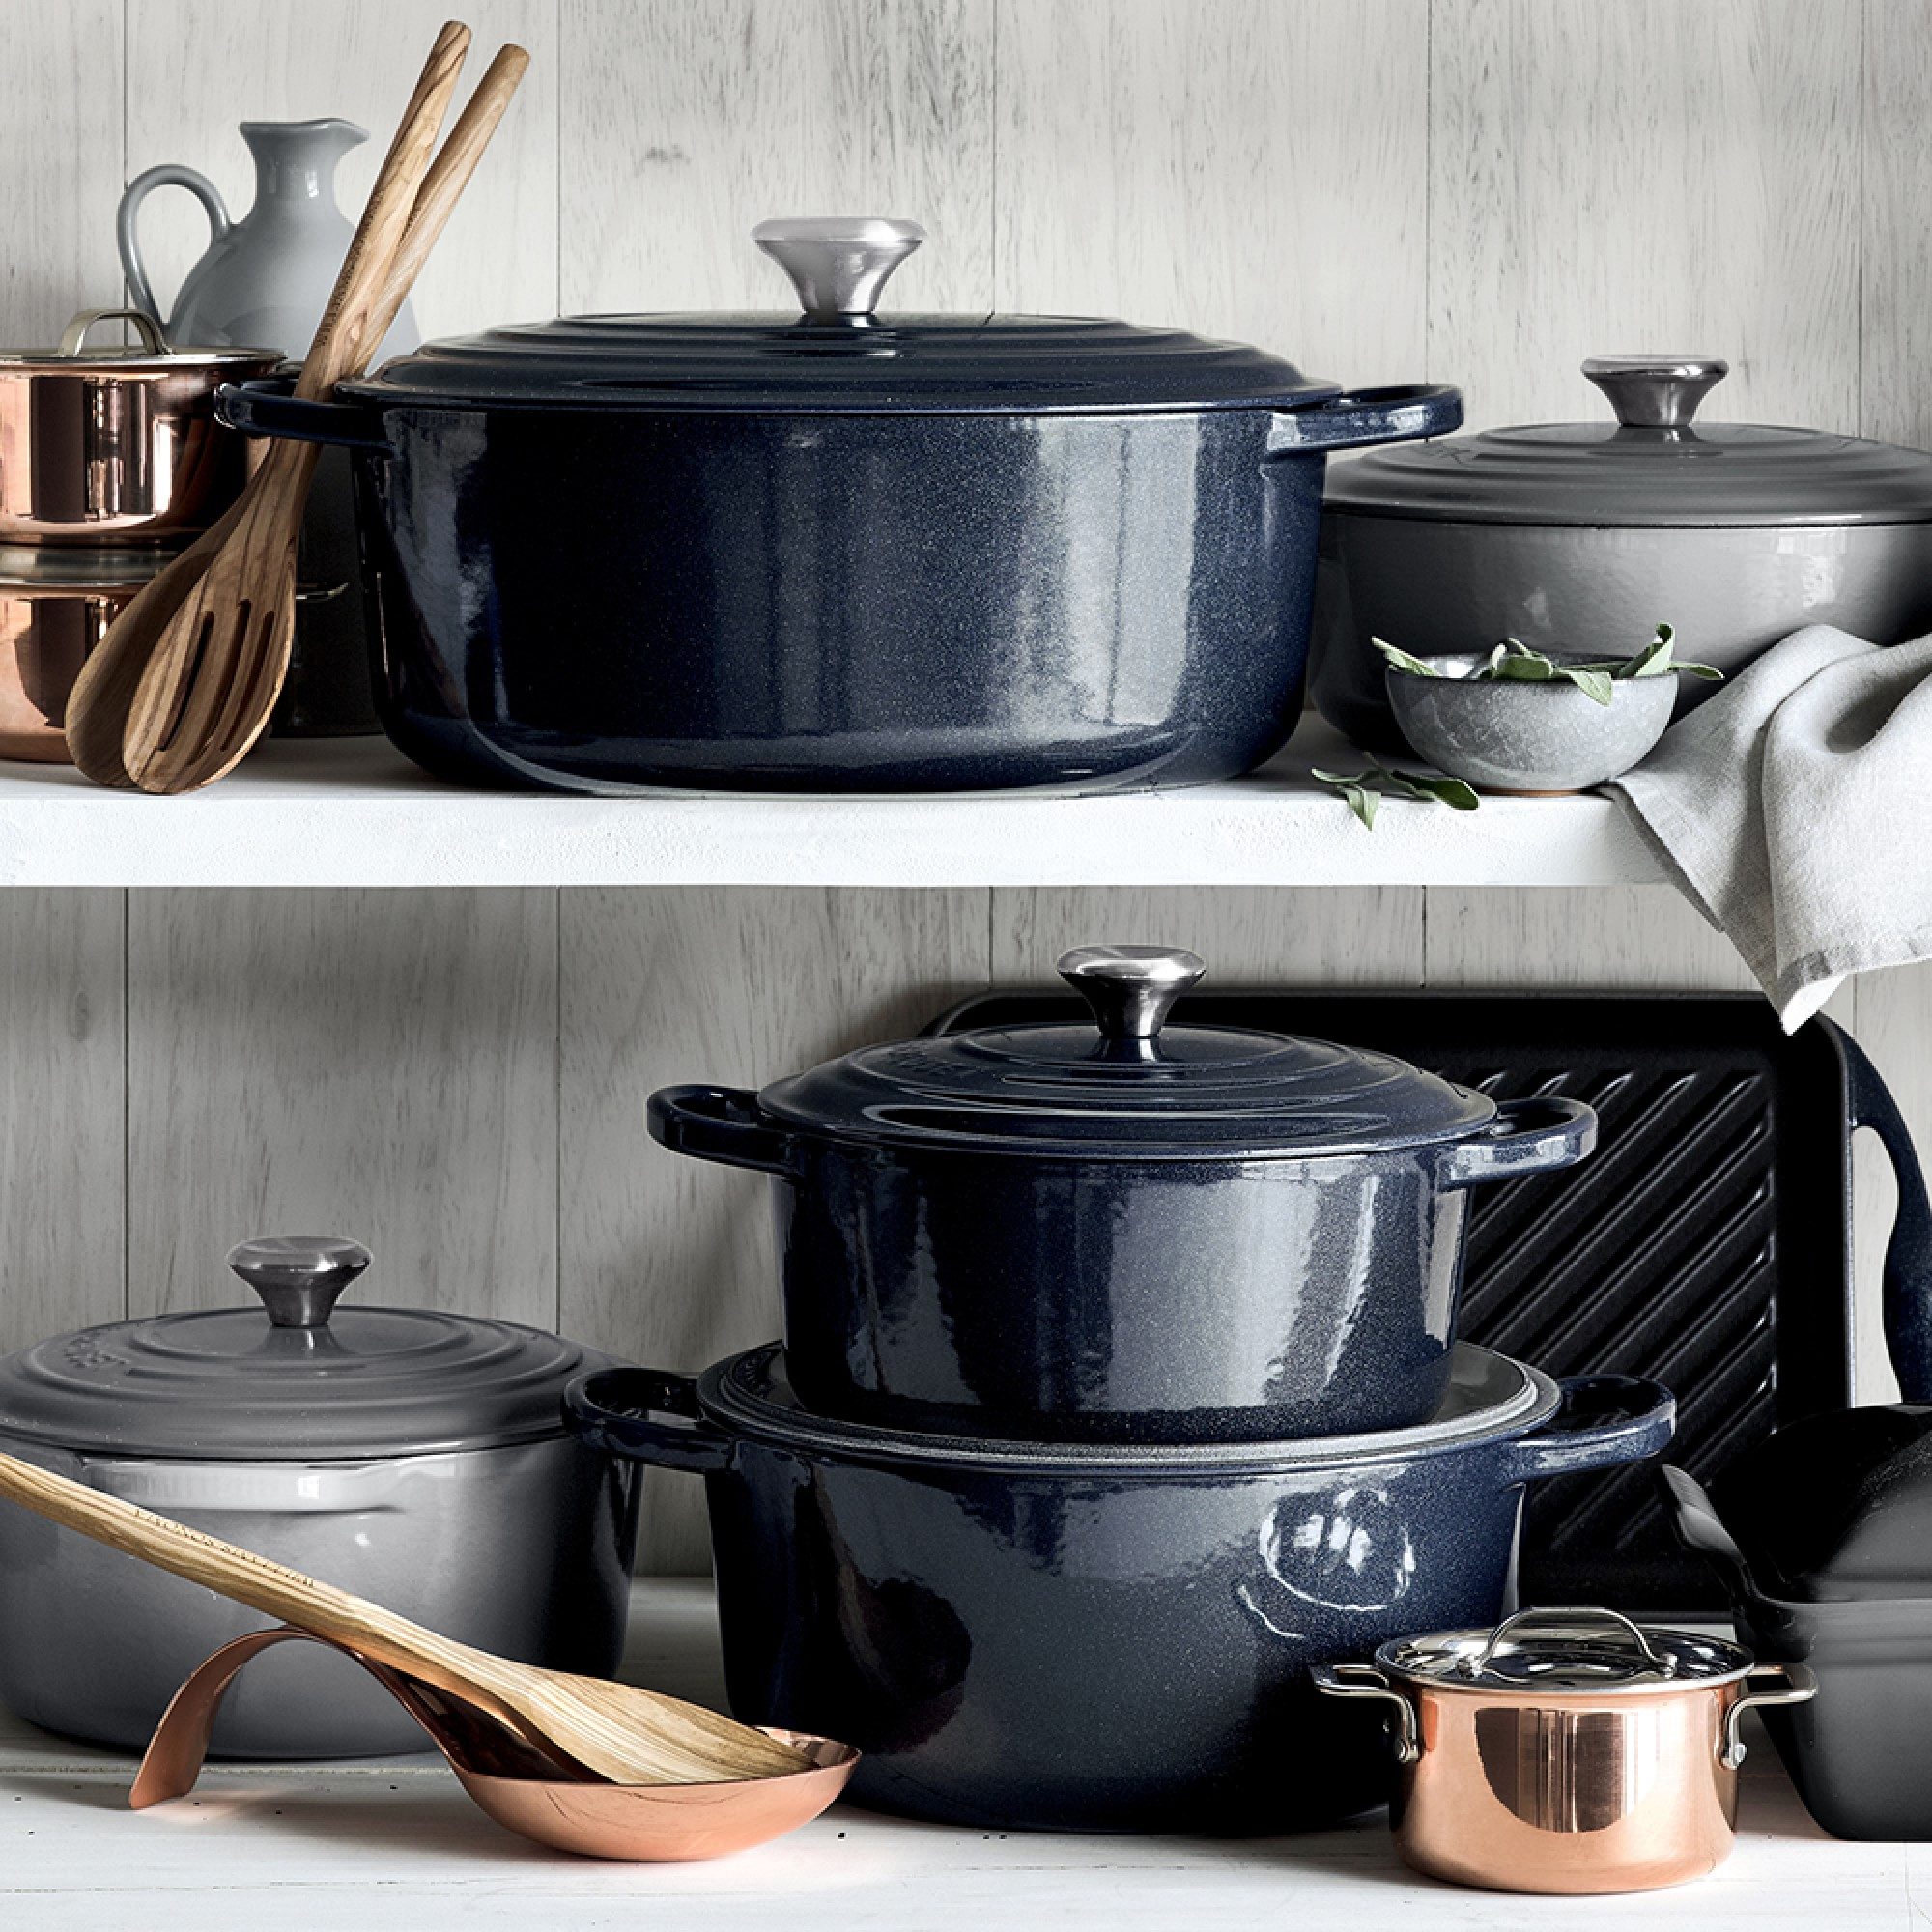 The best cast iron cookware, according to chefs and experts